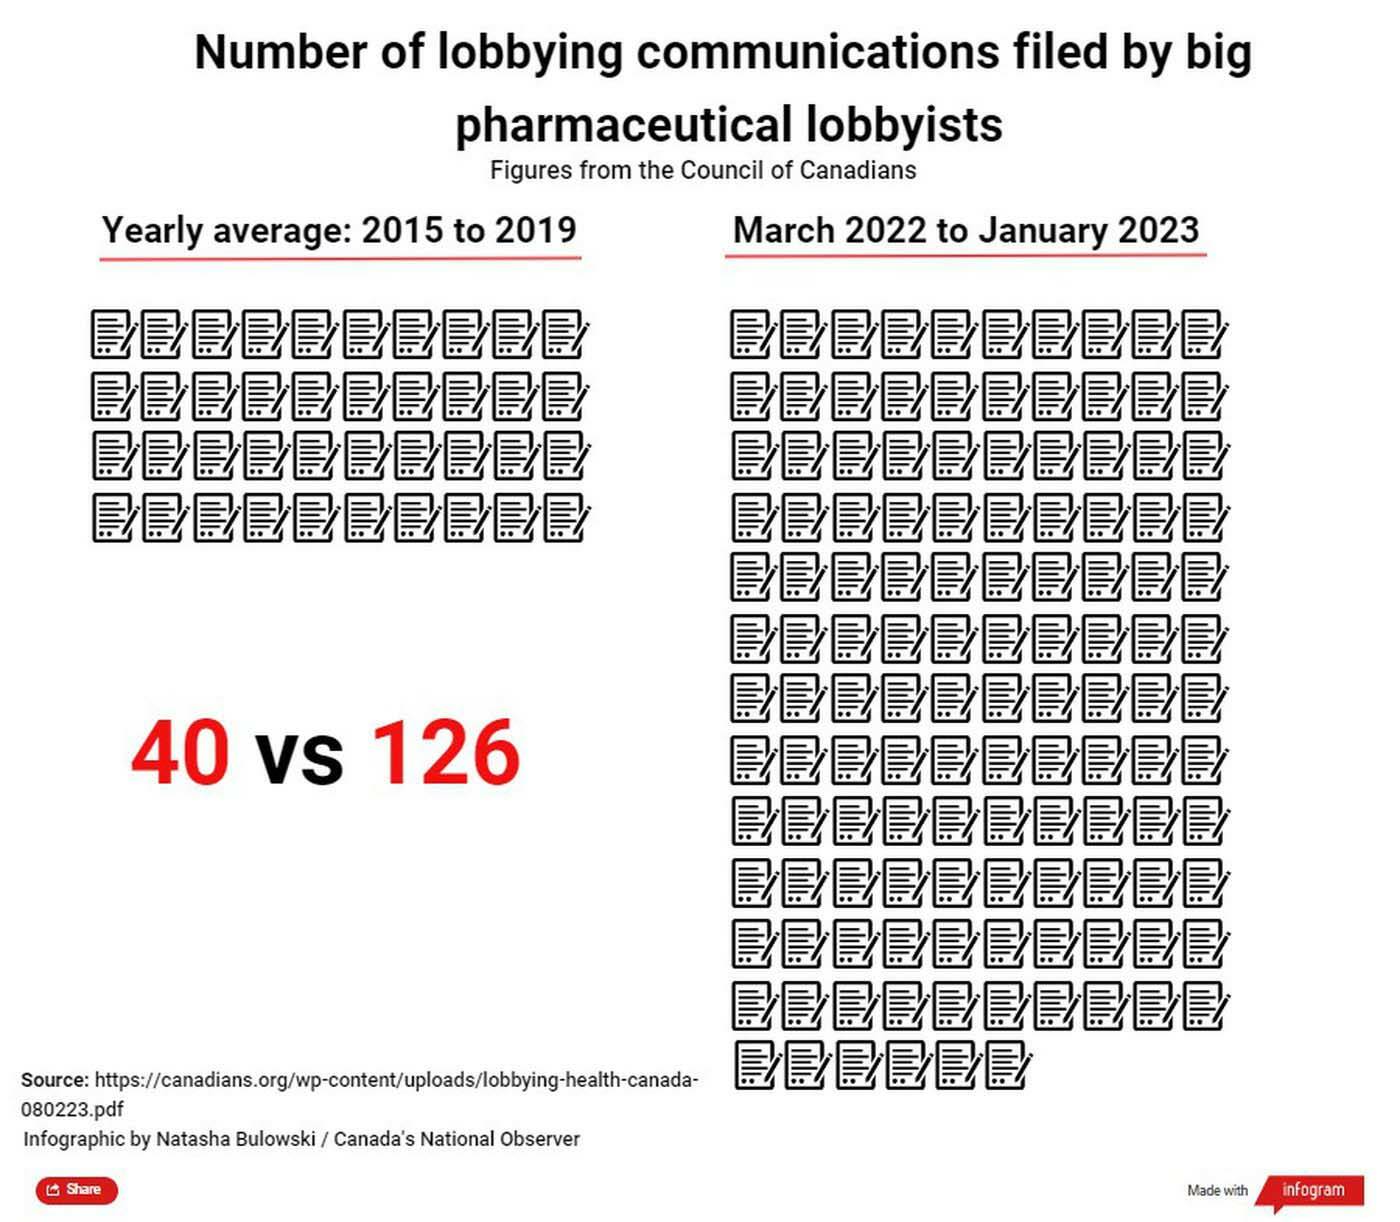 This graphic depicts the number of lobbying communication reports filed by the pharmaceutical lobby between March 2022 and January 2023 compared to the yearly average from 2015-19. The recent nine-month period from March to January saw over three times as many reports filed compared to the pre-pandemic yearly average. Based on data from the federal lobbyists registry compiled by the Council of Canadians. (Natasha Bulowski, Local Journalism Initiative Reporter)